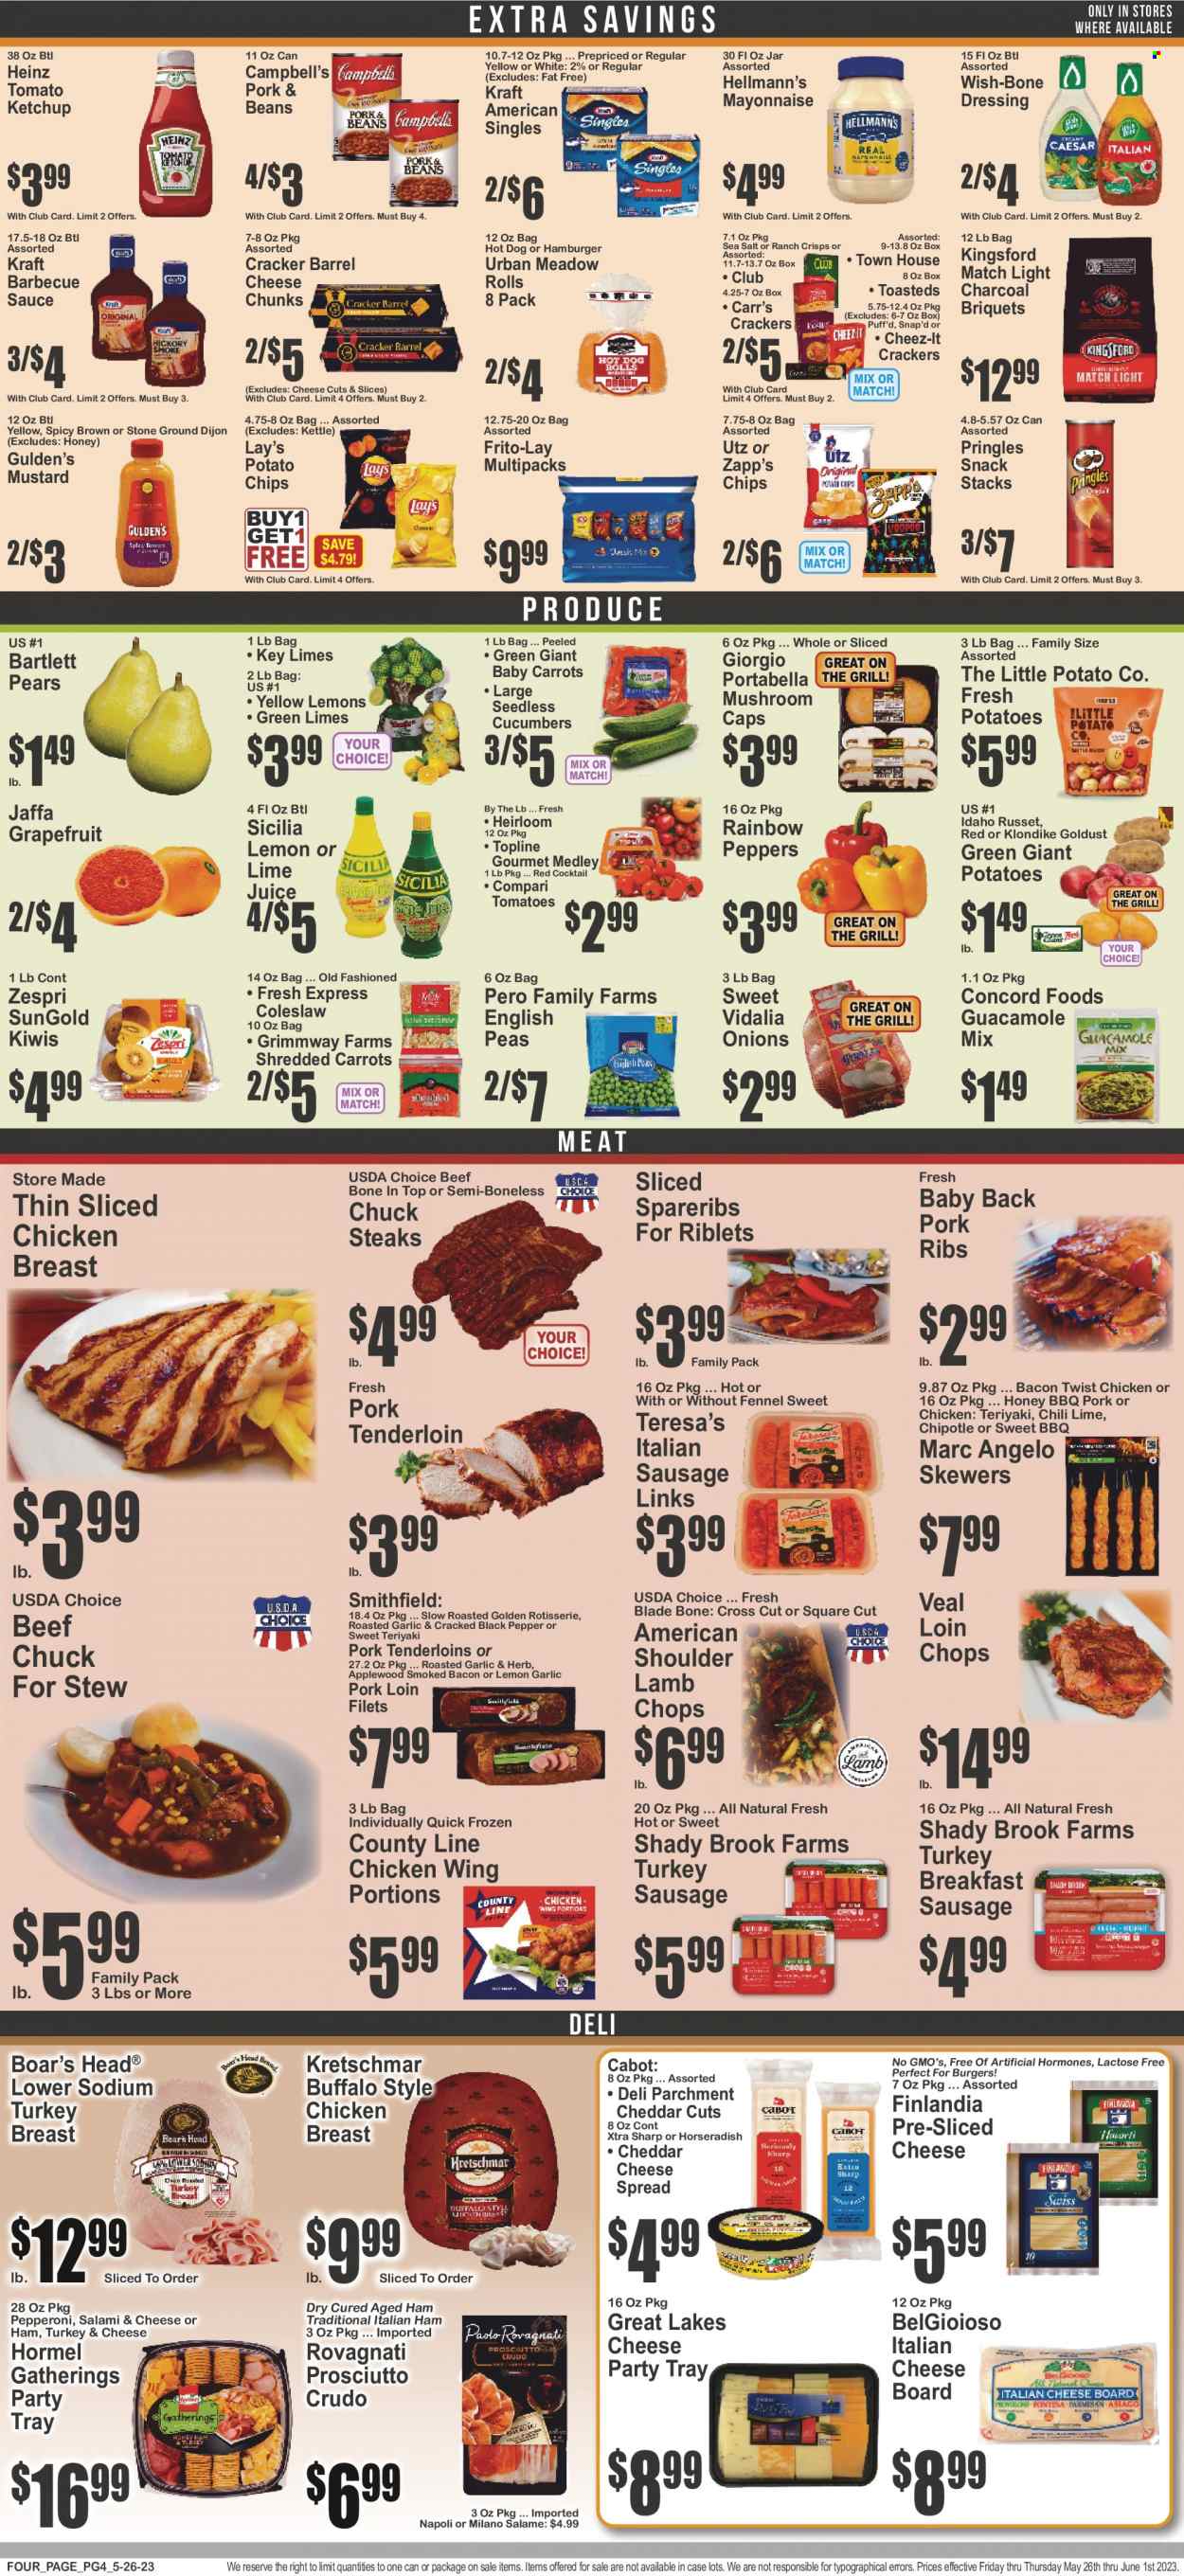 thumbnail - Key Food Flyer - 05/26/2023 - 06/01/2023 - Sales products - mushrooms, beans, carrots, cucumber, russet potatoes, horseradish, peas, onion, peppers, Bartlett pears, grapefruits, kiwi, limes, pears, Campbell's, coleslaw, hot dog, hamburger, sauce, Kraft®, Hormel, Kingsford, Boar's Head, salami, prosciutto, snack, sausage, pepperoni, italian sausage, cheese spread, guacamole, sliced cheese, Kraft Singles, mayonnaise, Hellmann’s, crackers, potato chips, Pringles, Lay’s, Frito-Lay, Cheez-It, salty snack, Heinz, fennel, black pepper, BBQ sauce, mustard, ketchup, dressing, honey, chicken breasts, chicken, turkey, steak, ribs, pork loin, pork meat, pork ribs, pork tenderloin, pork spare ribs, pork back ribs, lamb chops, lamb meat, XTRA, cheese board, beef bone. Page 4.